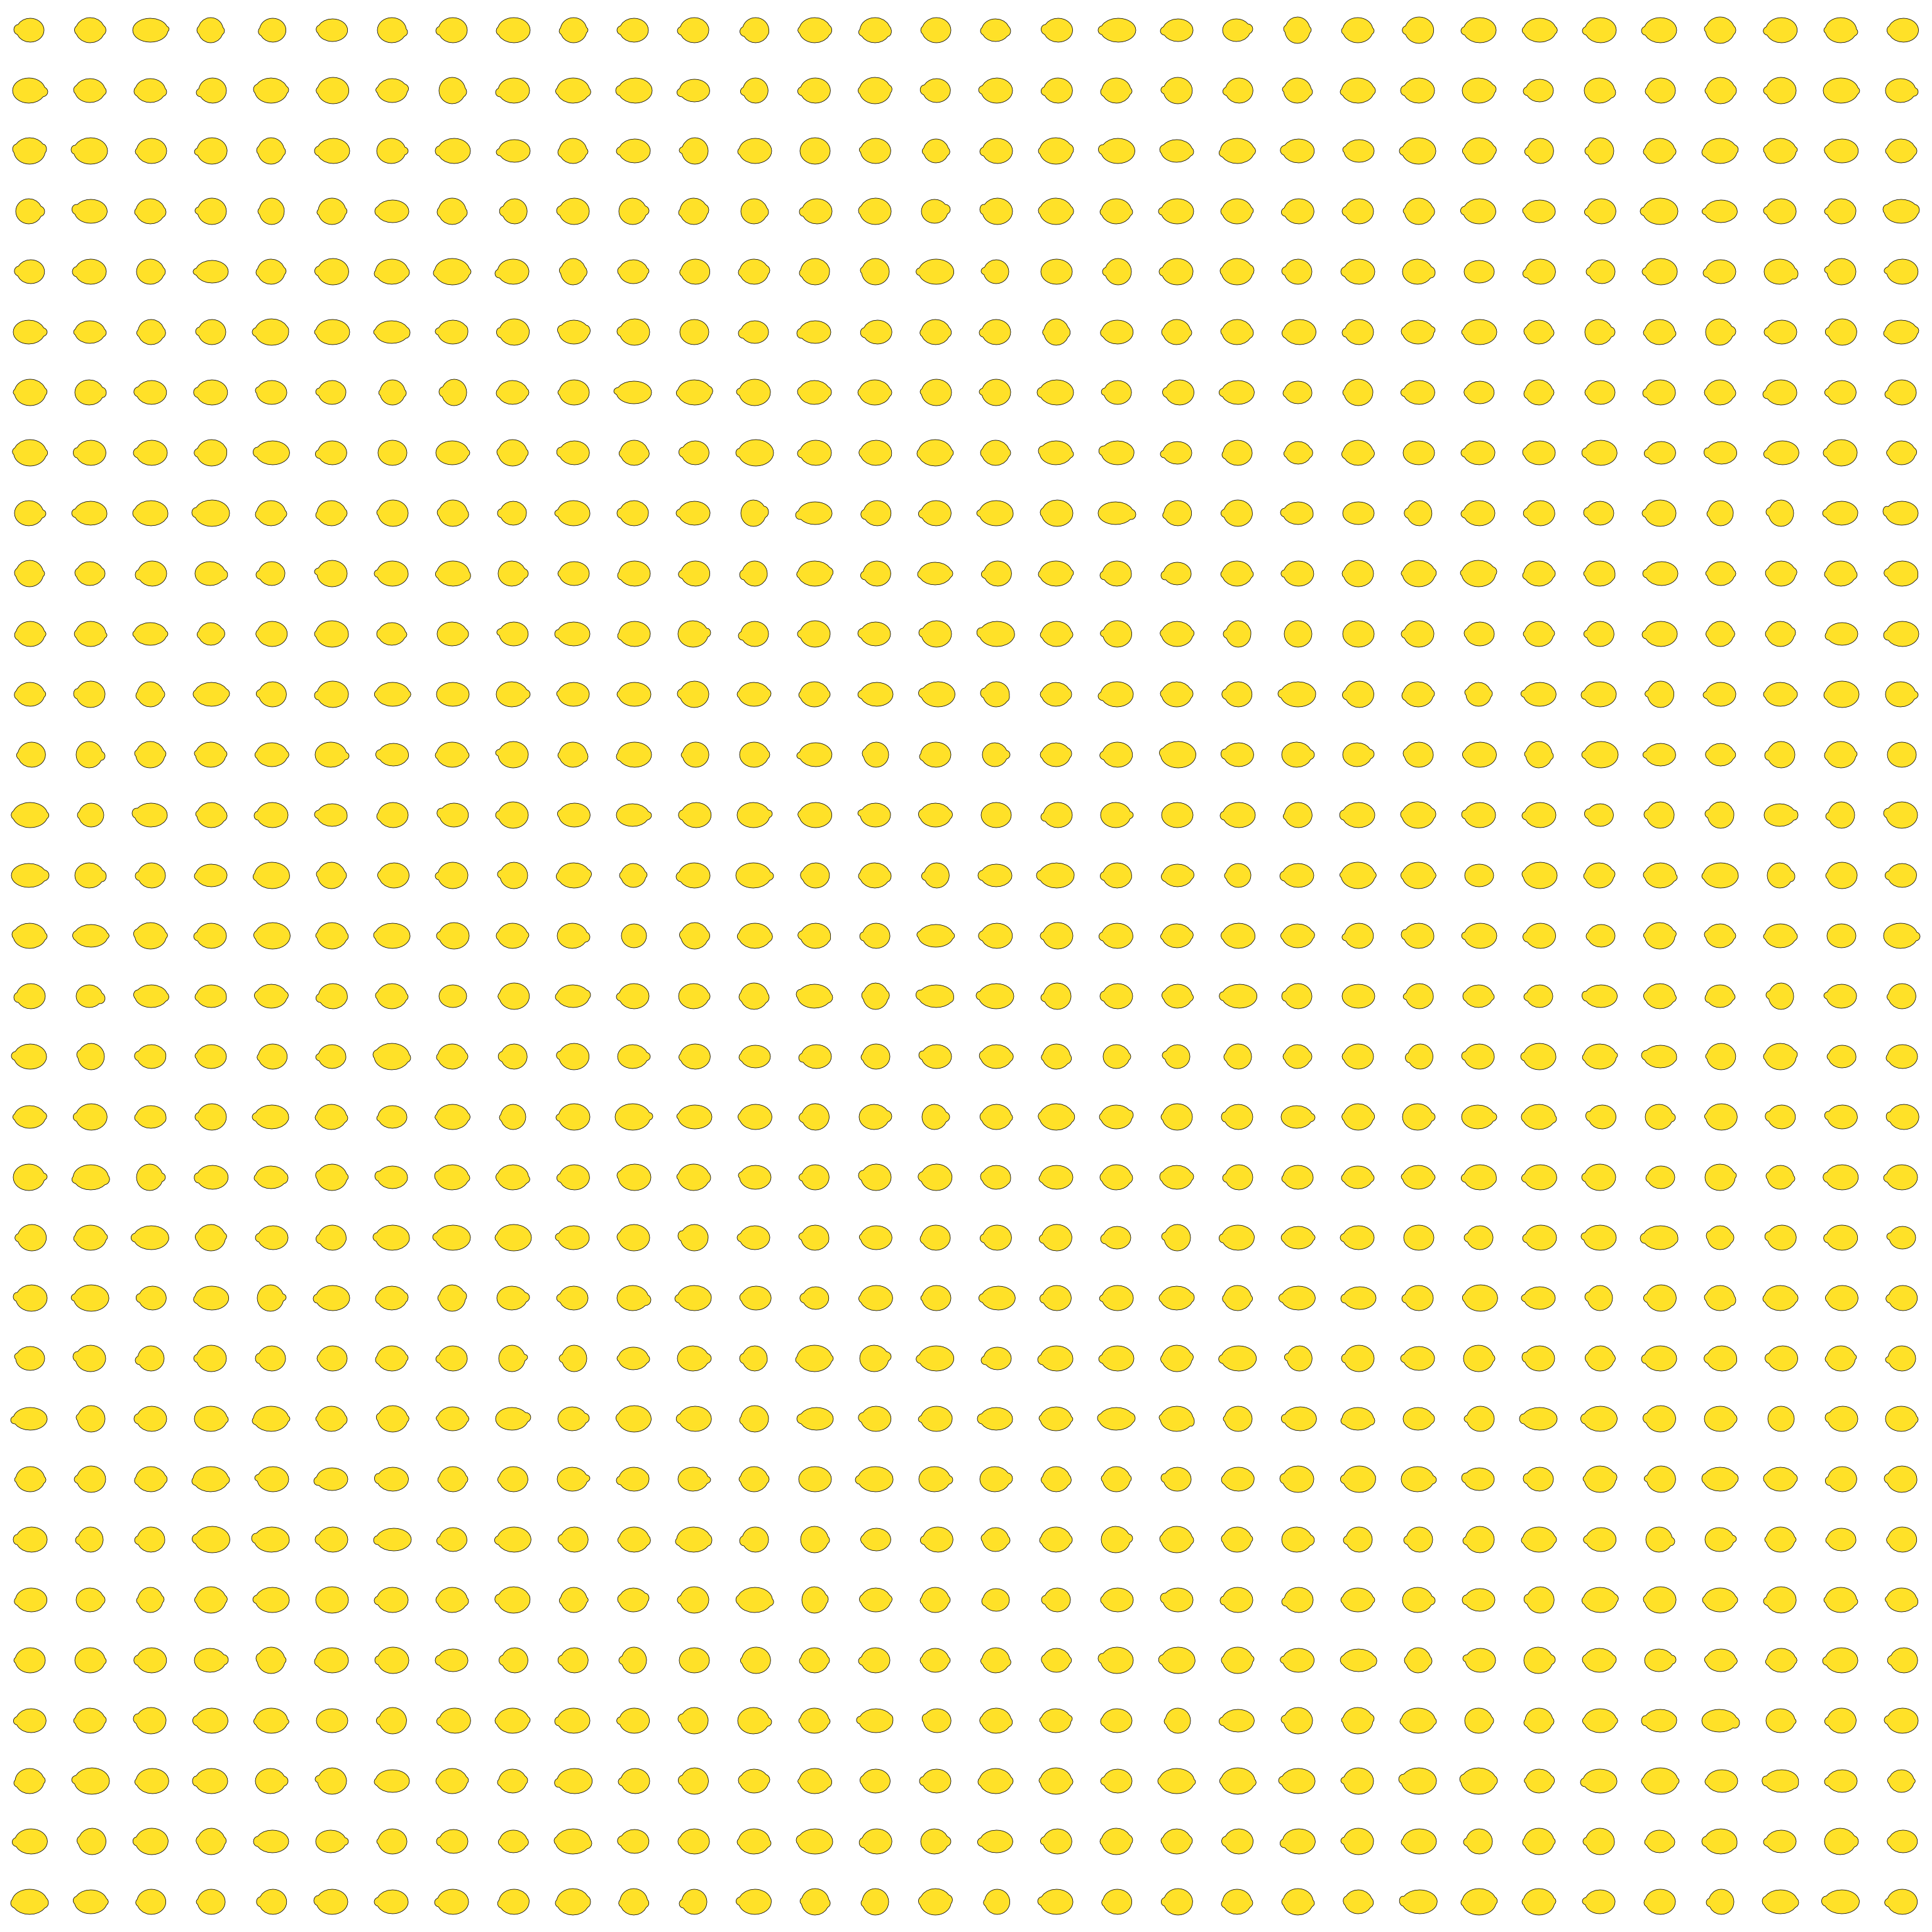 A grid of small illustrations of yellow lemons.